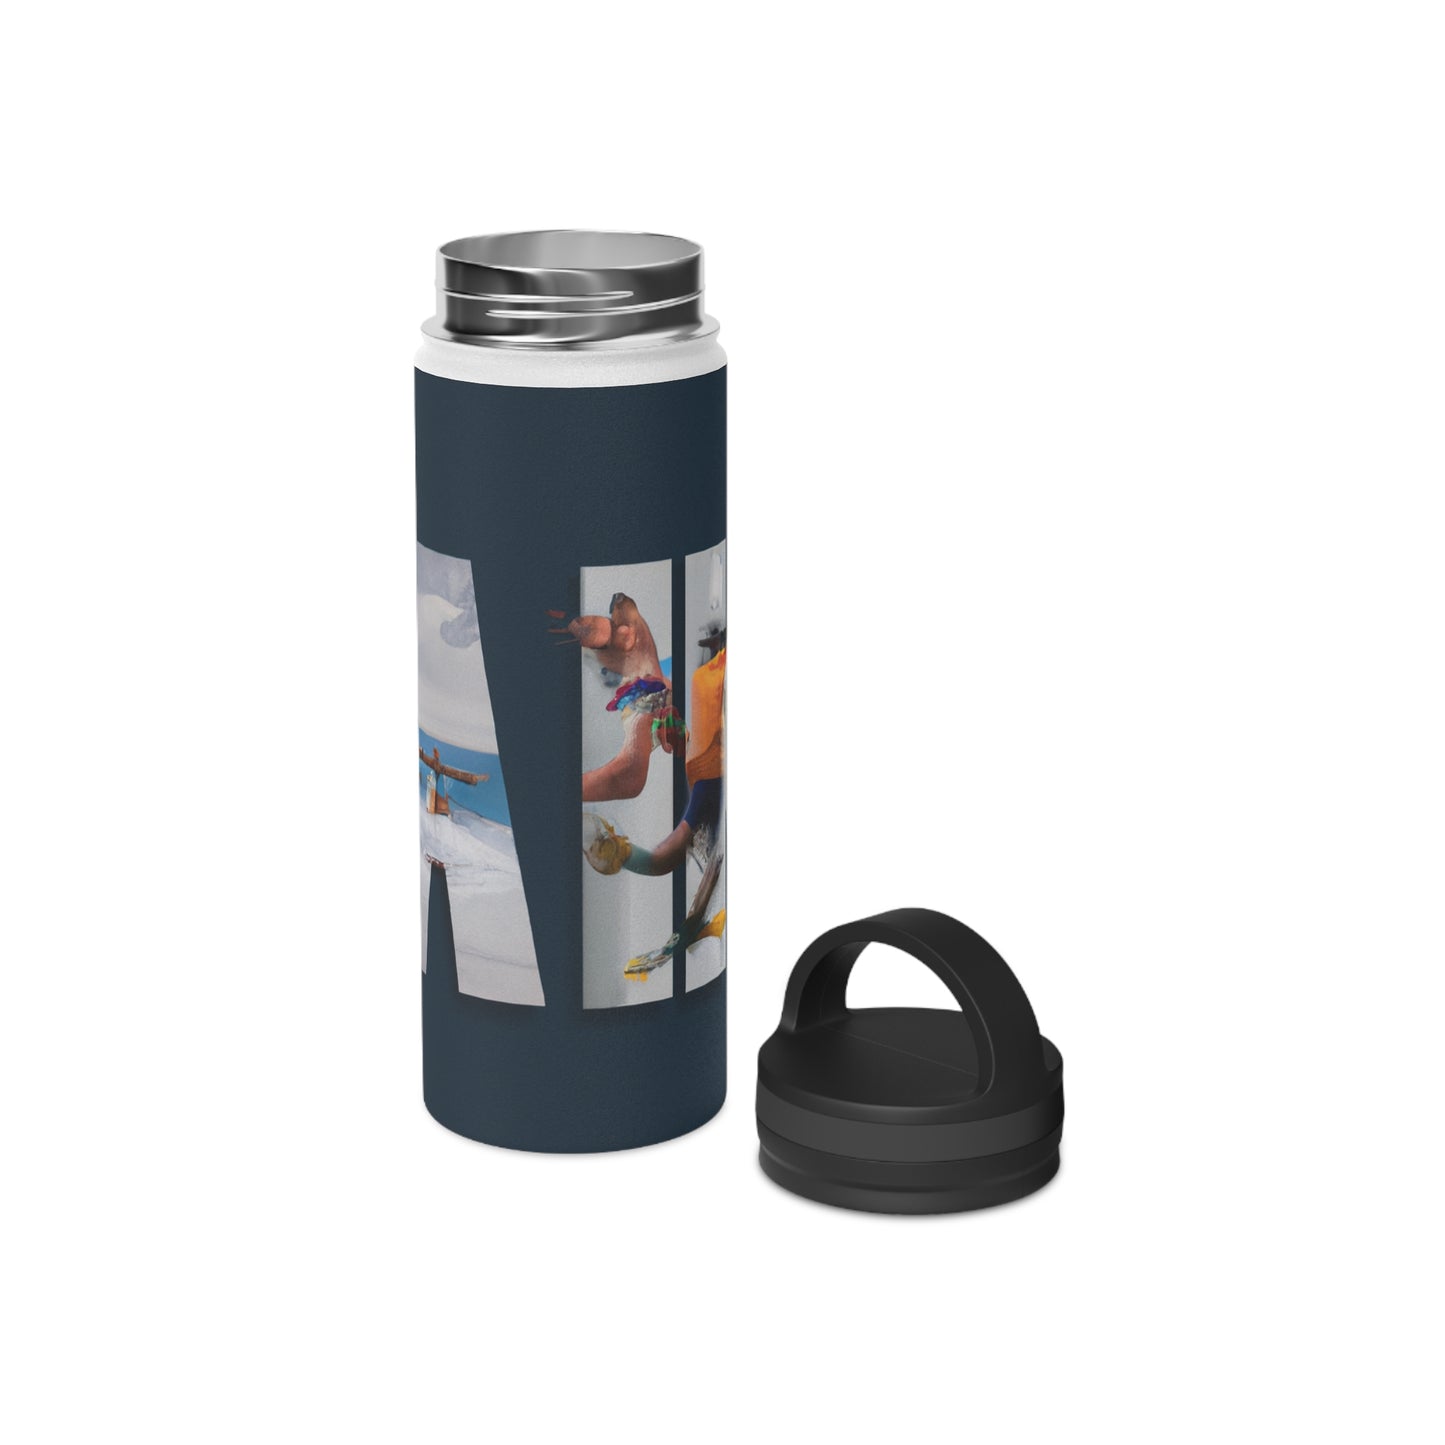 Unleashed: A Mixed Media Symphonic Story of Sports, Art, and Imagery - Go Plus Stainless Steel Water Bottle, Handle Lid